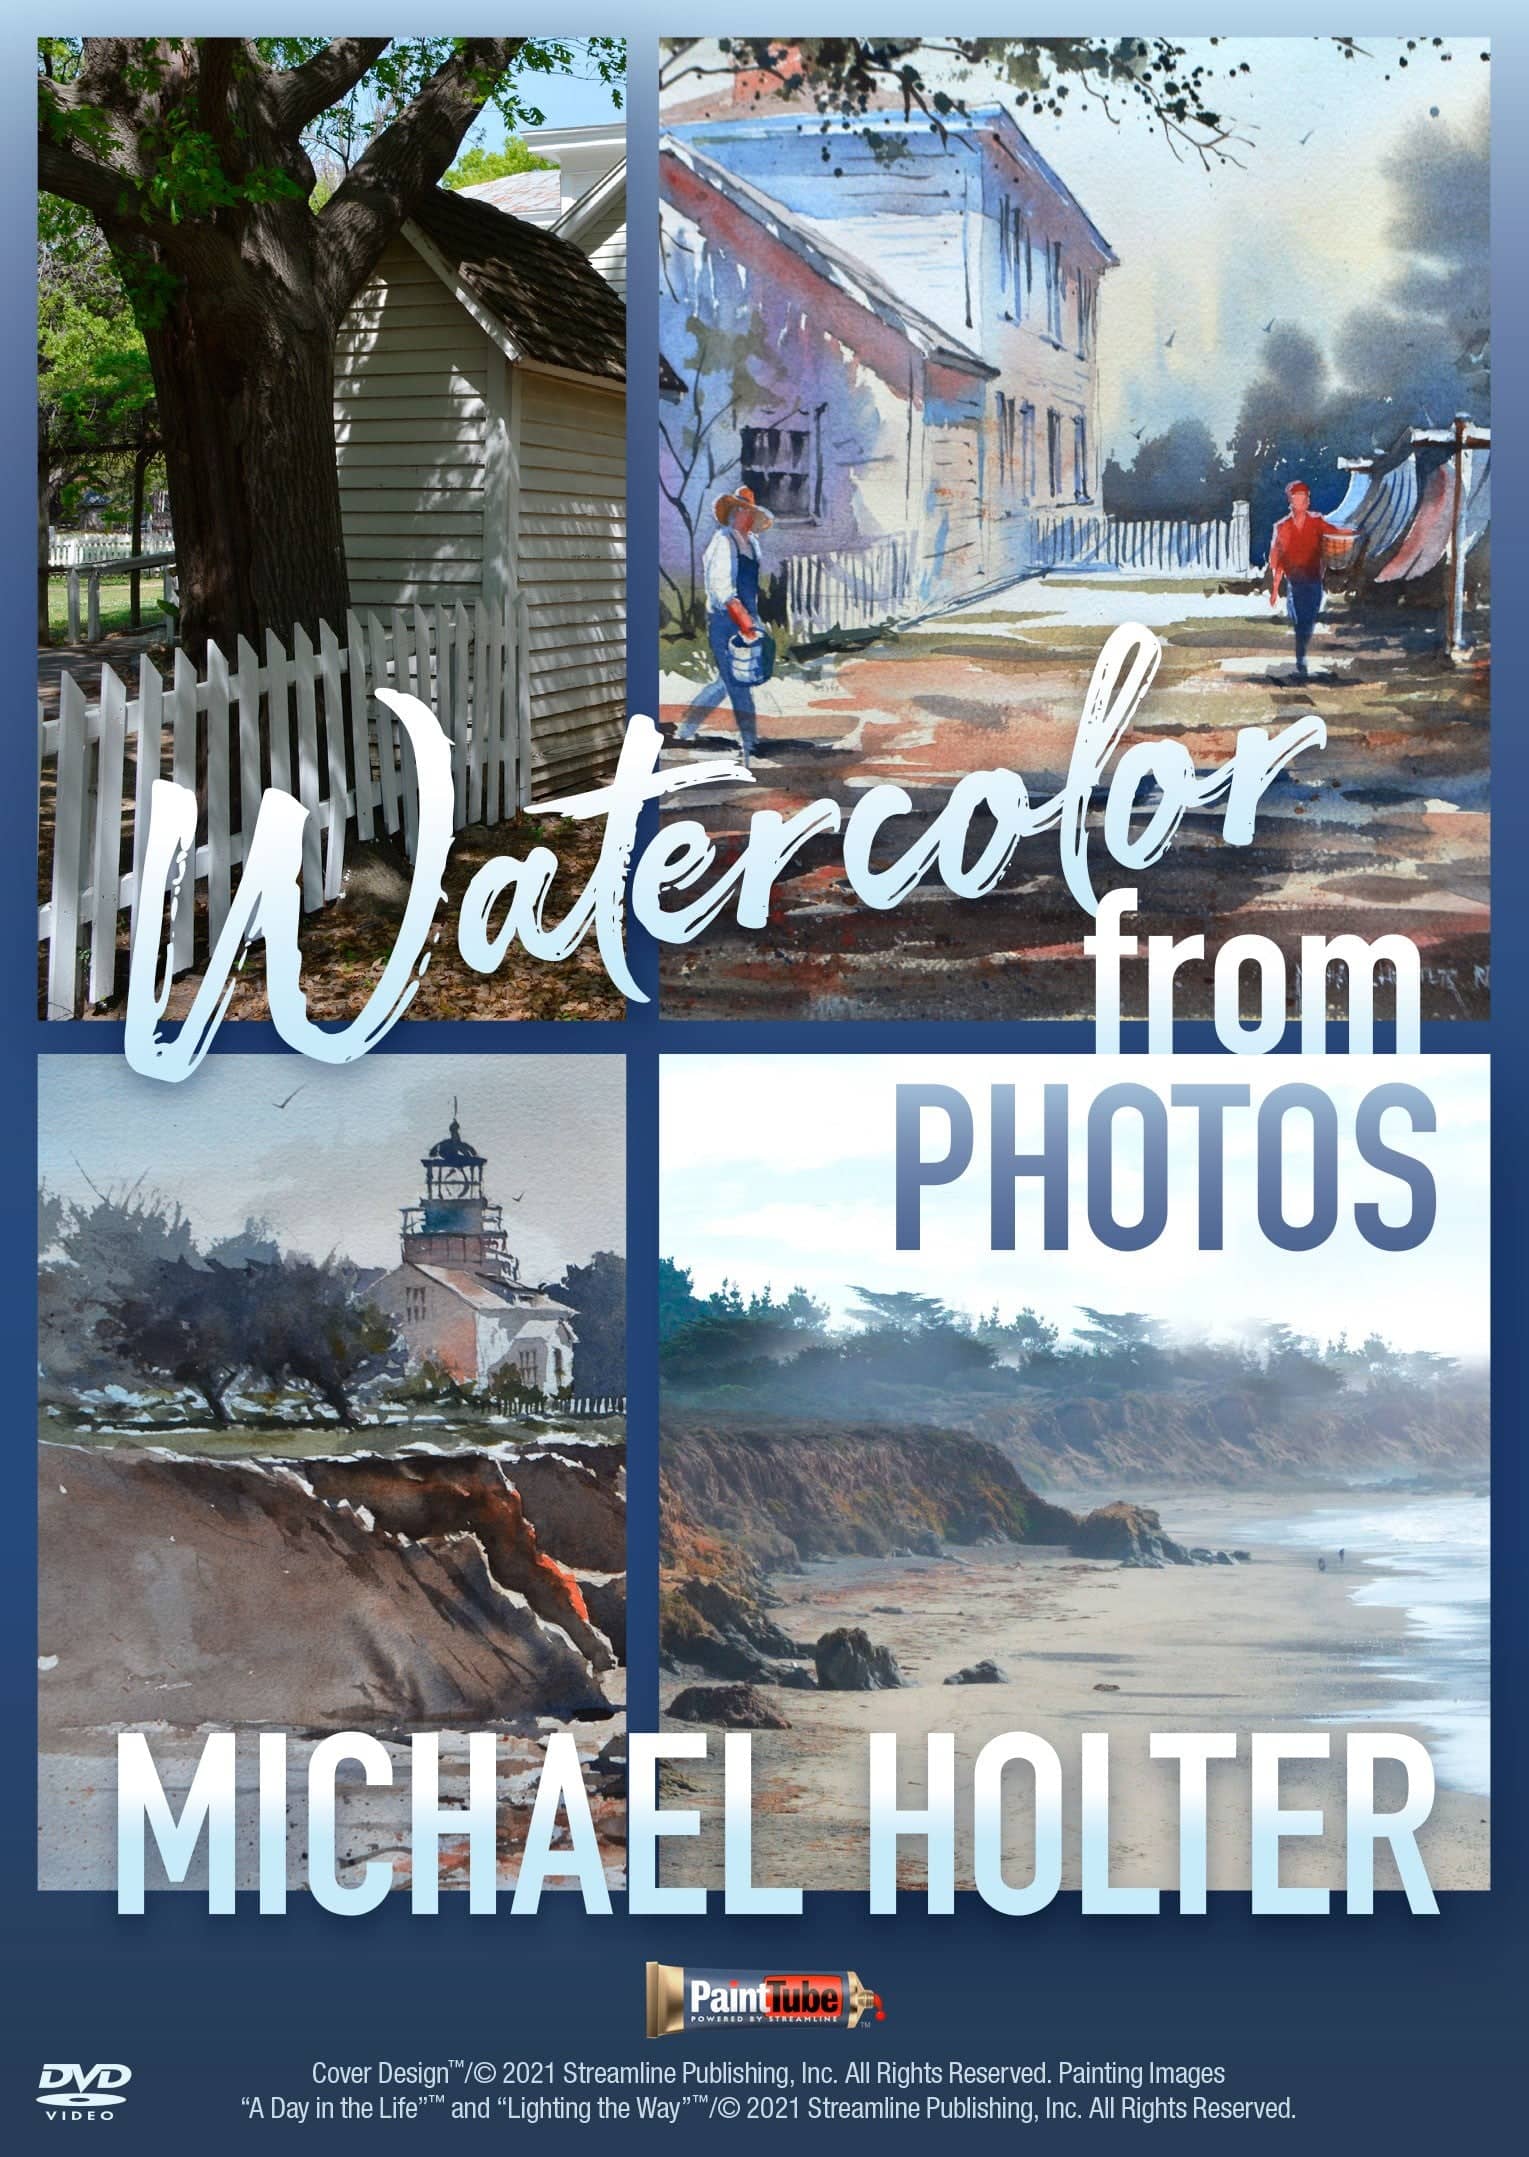 Michael Holter: Watercolor from Photos